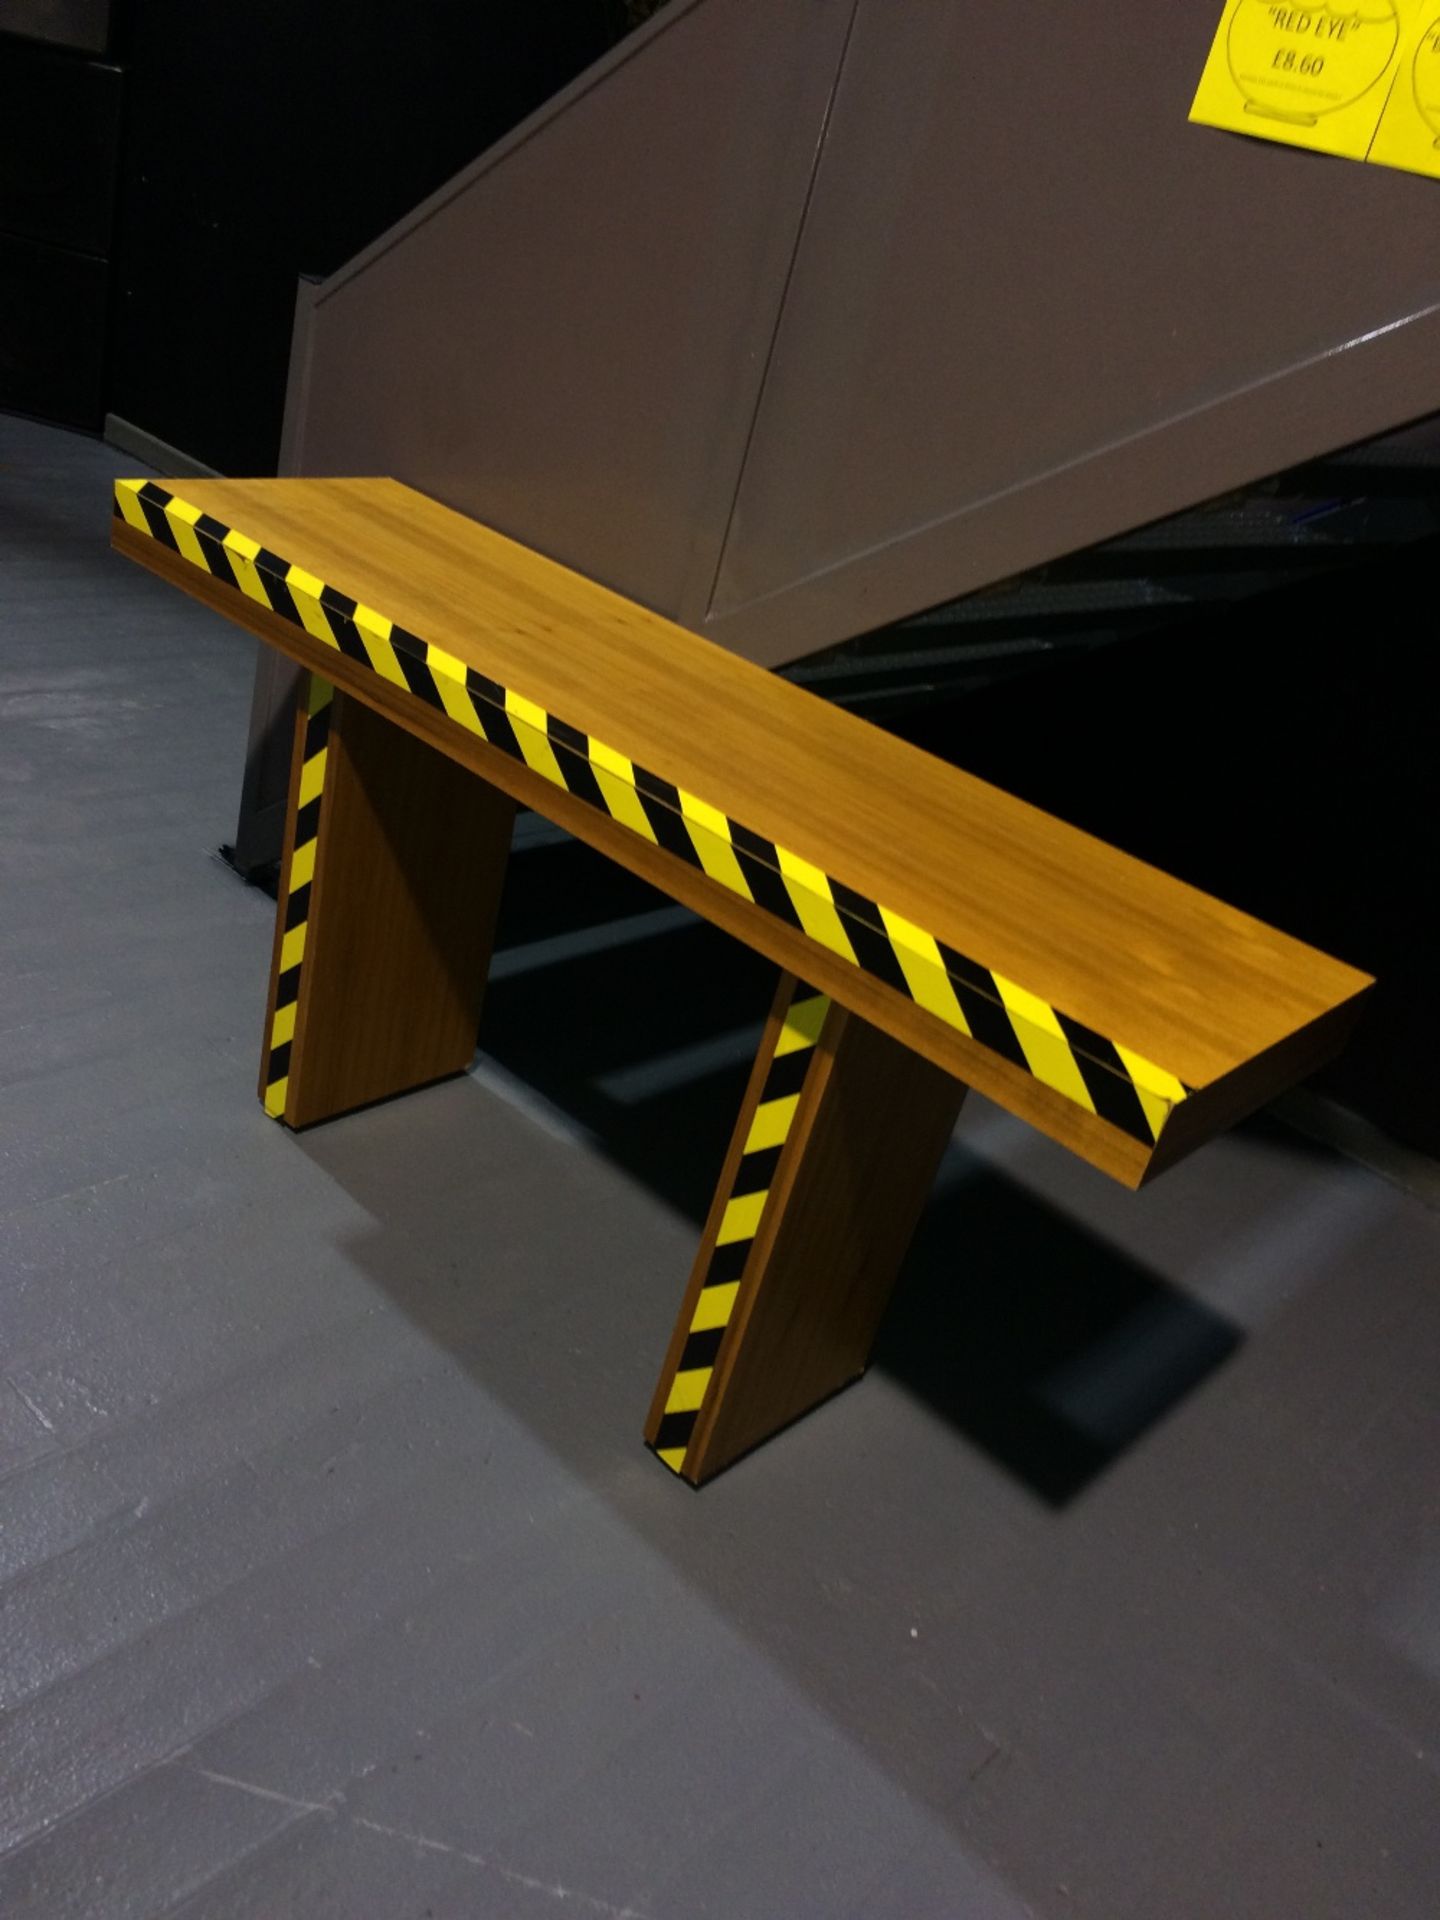 Wood Table Yellow And Black Tape Is Easily Removable - Image 3 of 4